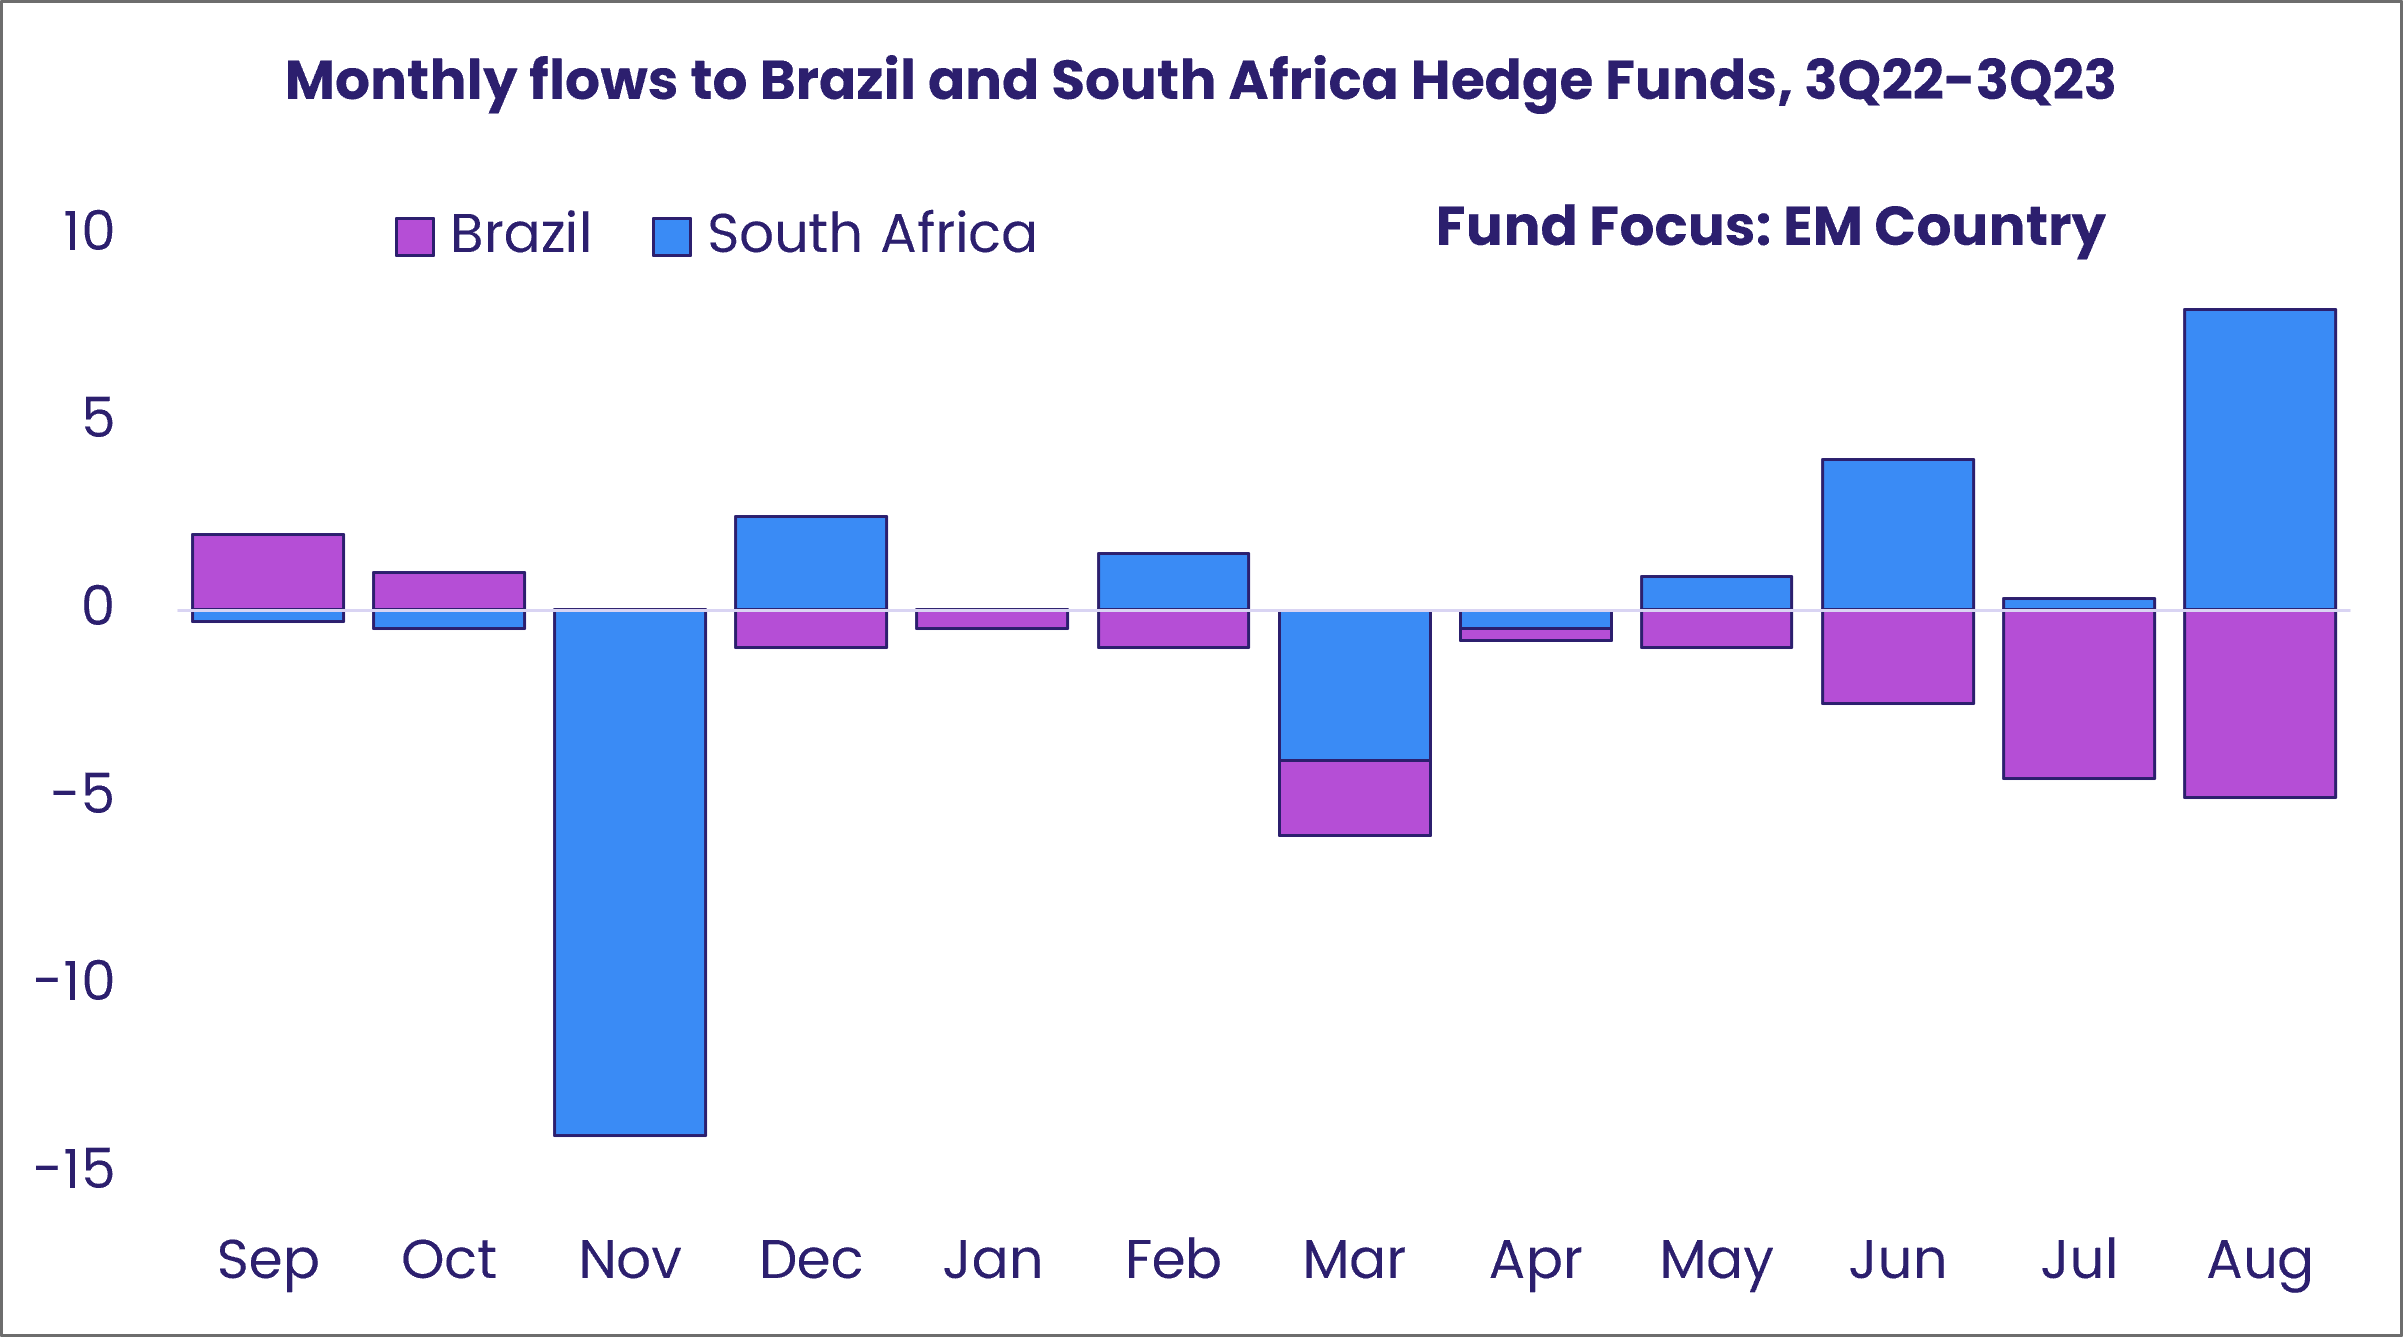 Image of a chart representing "Monthly flows to Brazil and South Africa Hedge Funds, 3Q22-3Q23"